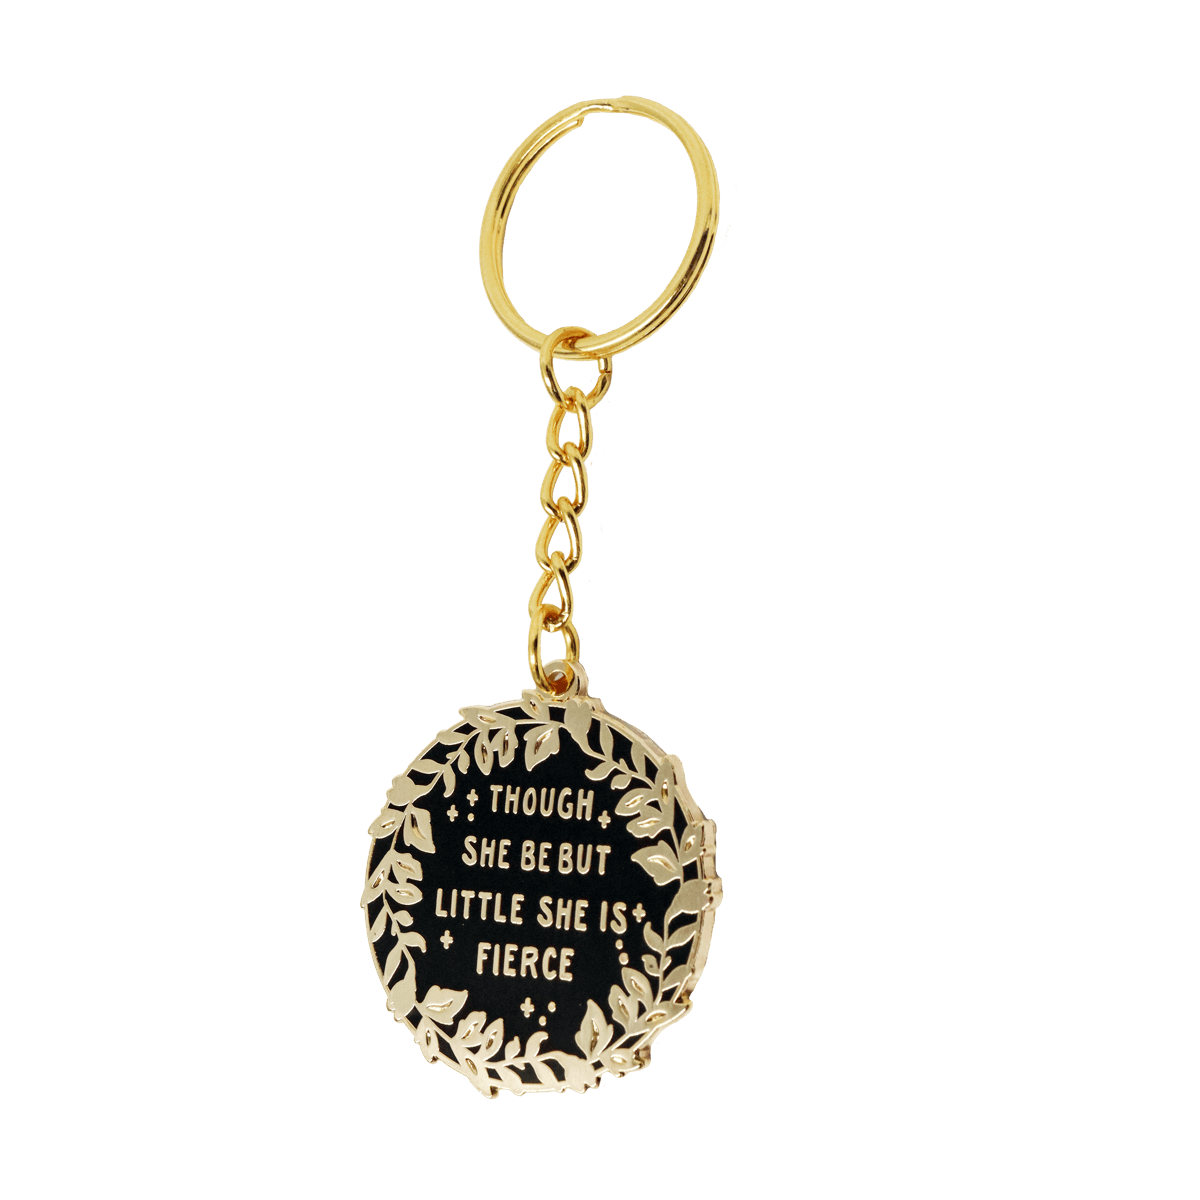 A keyring featuring the Shakespeare quote - Though she be but little, she is fierce.